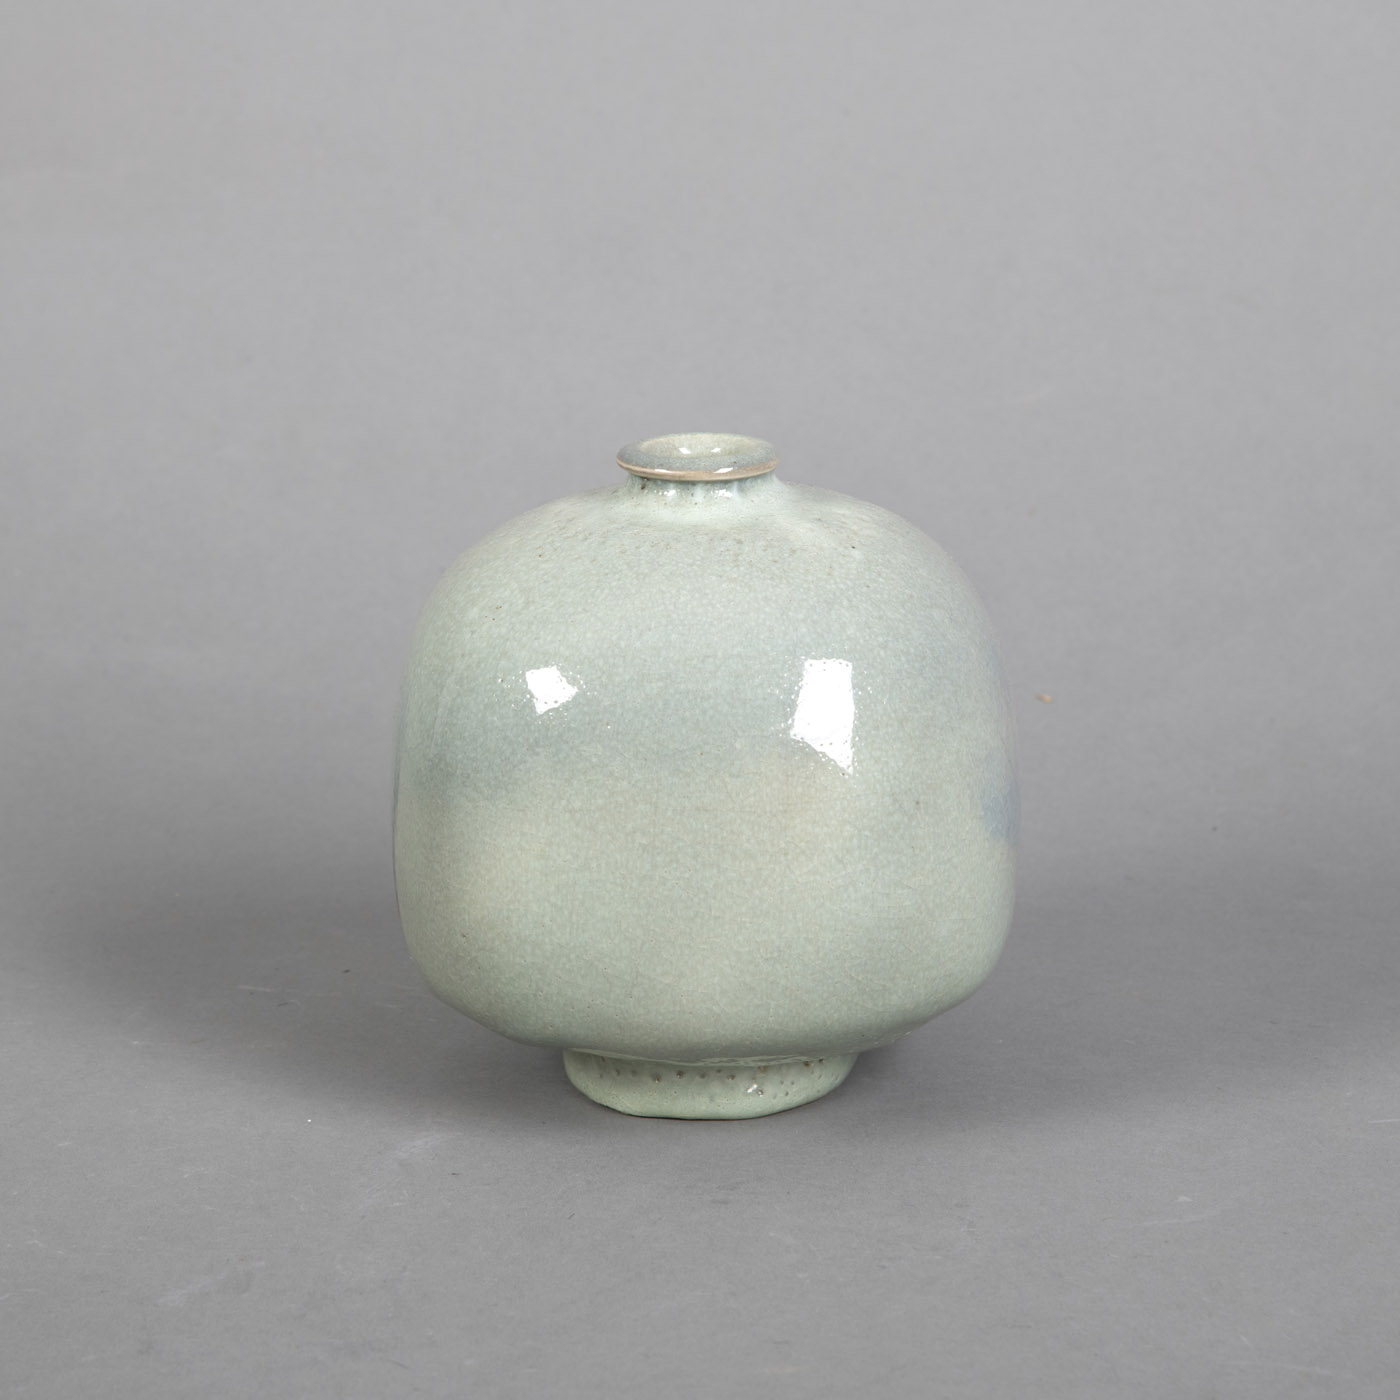 <b>A SPHERICAL PORCELAIN VASE, COVERED WITH A LIGHT CRACKLED CELADON GLAZE WITH PARTIAL BLUE EFFECT FROM THE WORKSHOP OF SIEGFRIED AND JUSCHA SCHNEIDER-GÖRING</b>